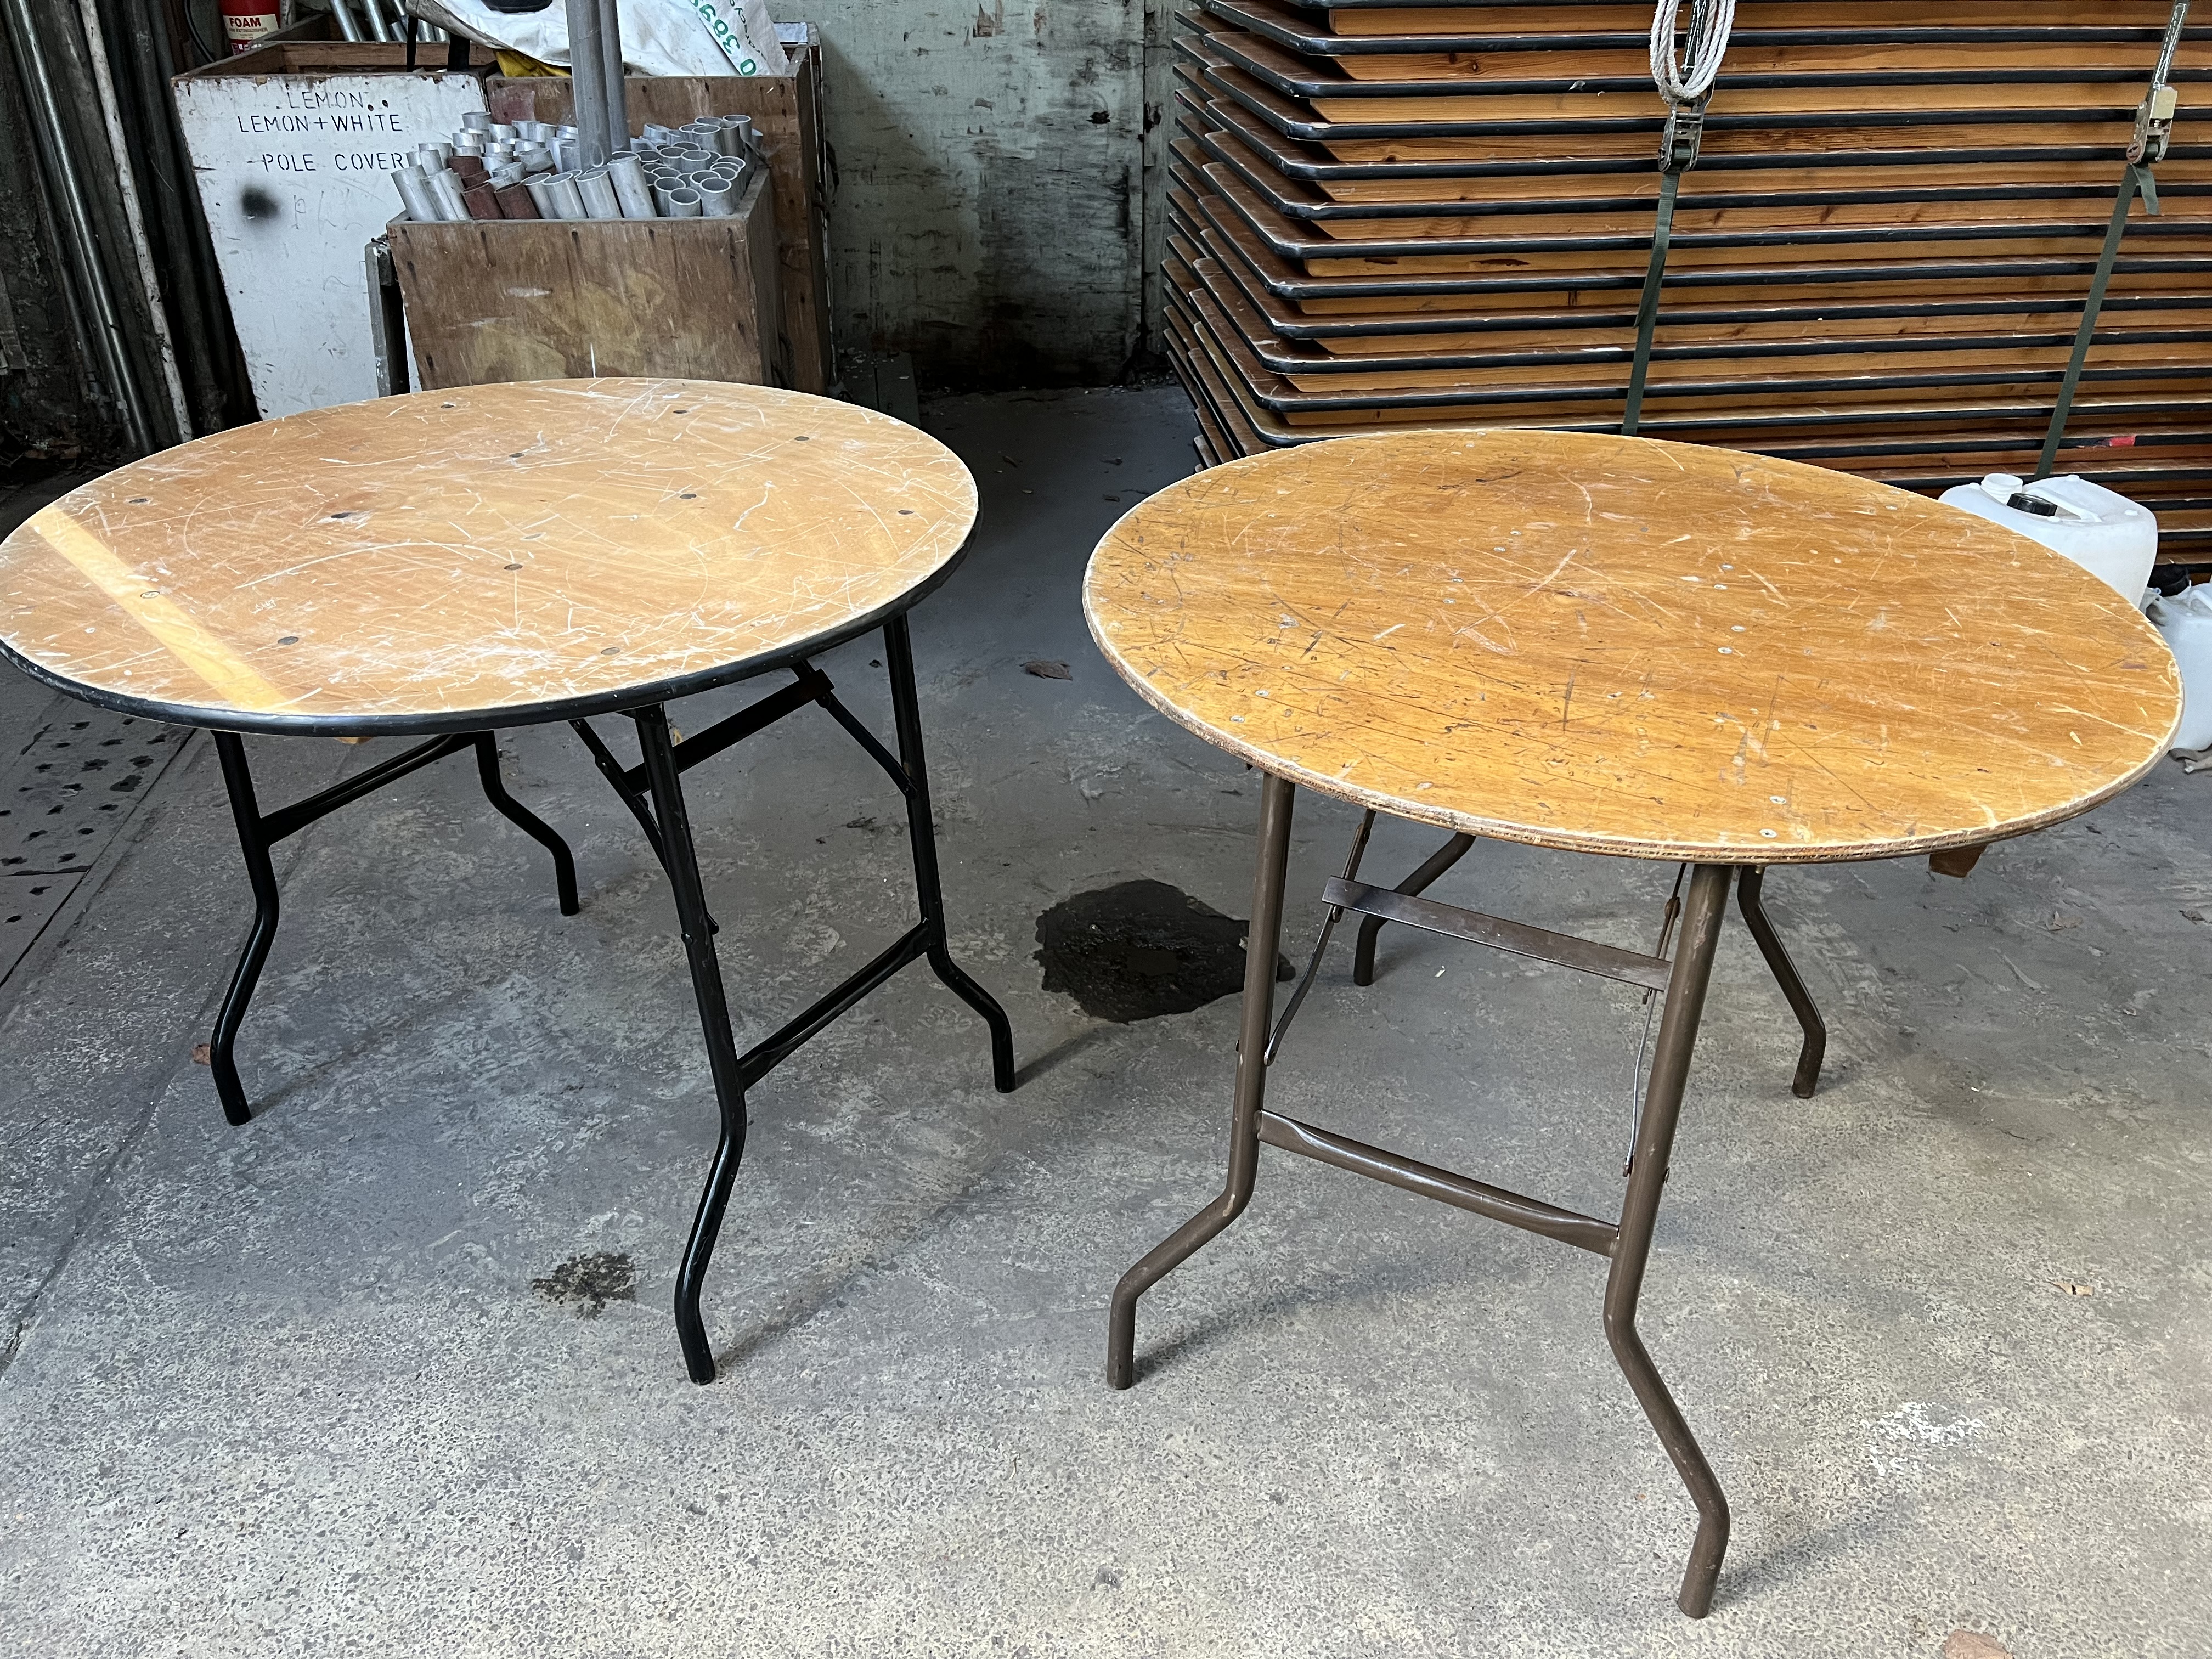 30 no 3ft diameter round tables with folding legs and plywood top. This lot is subject to VAT.